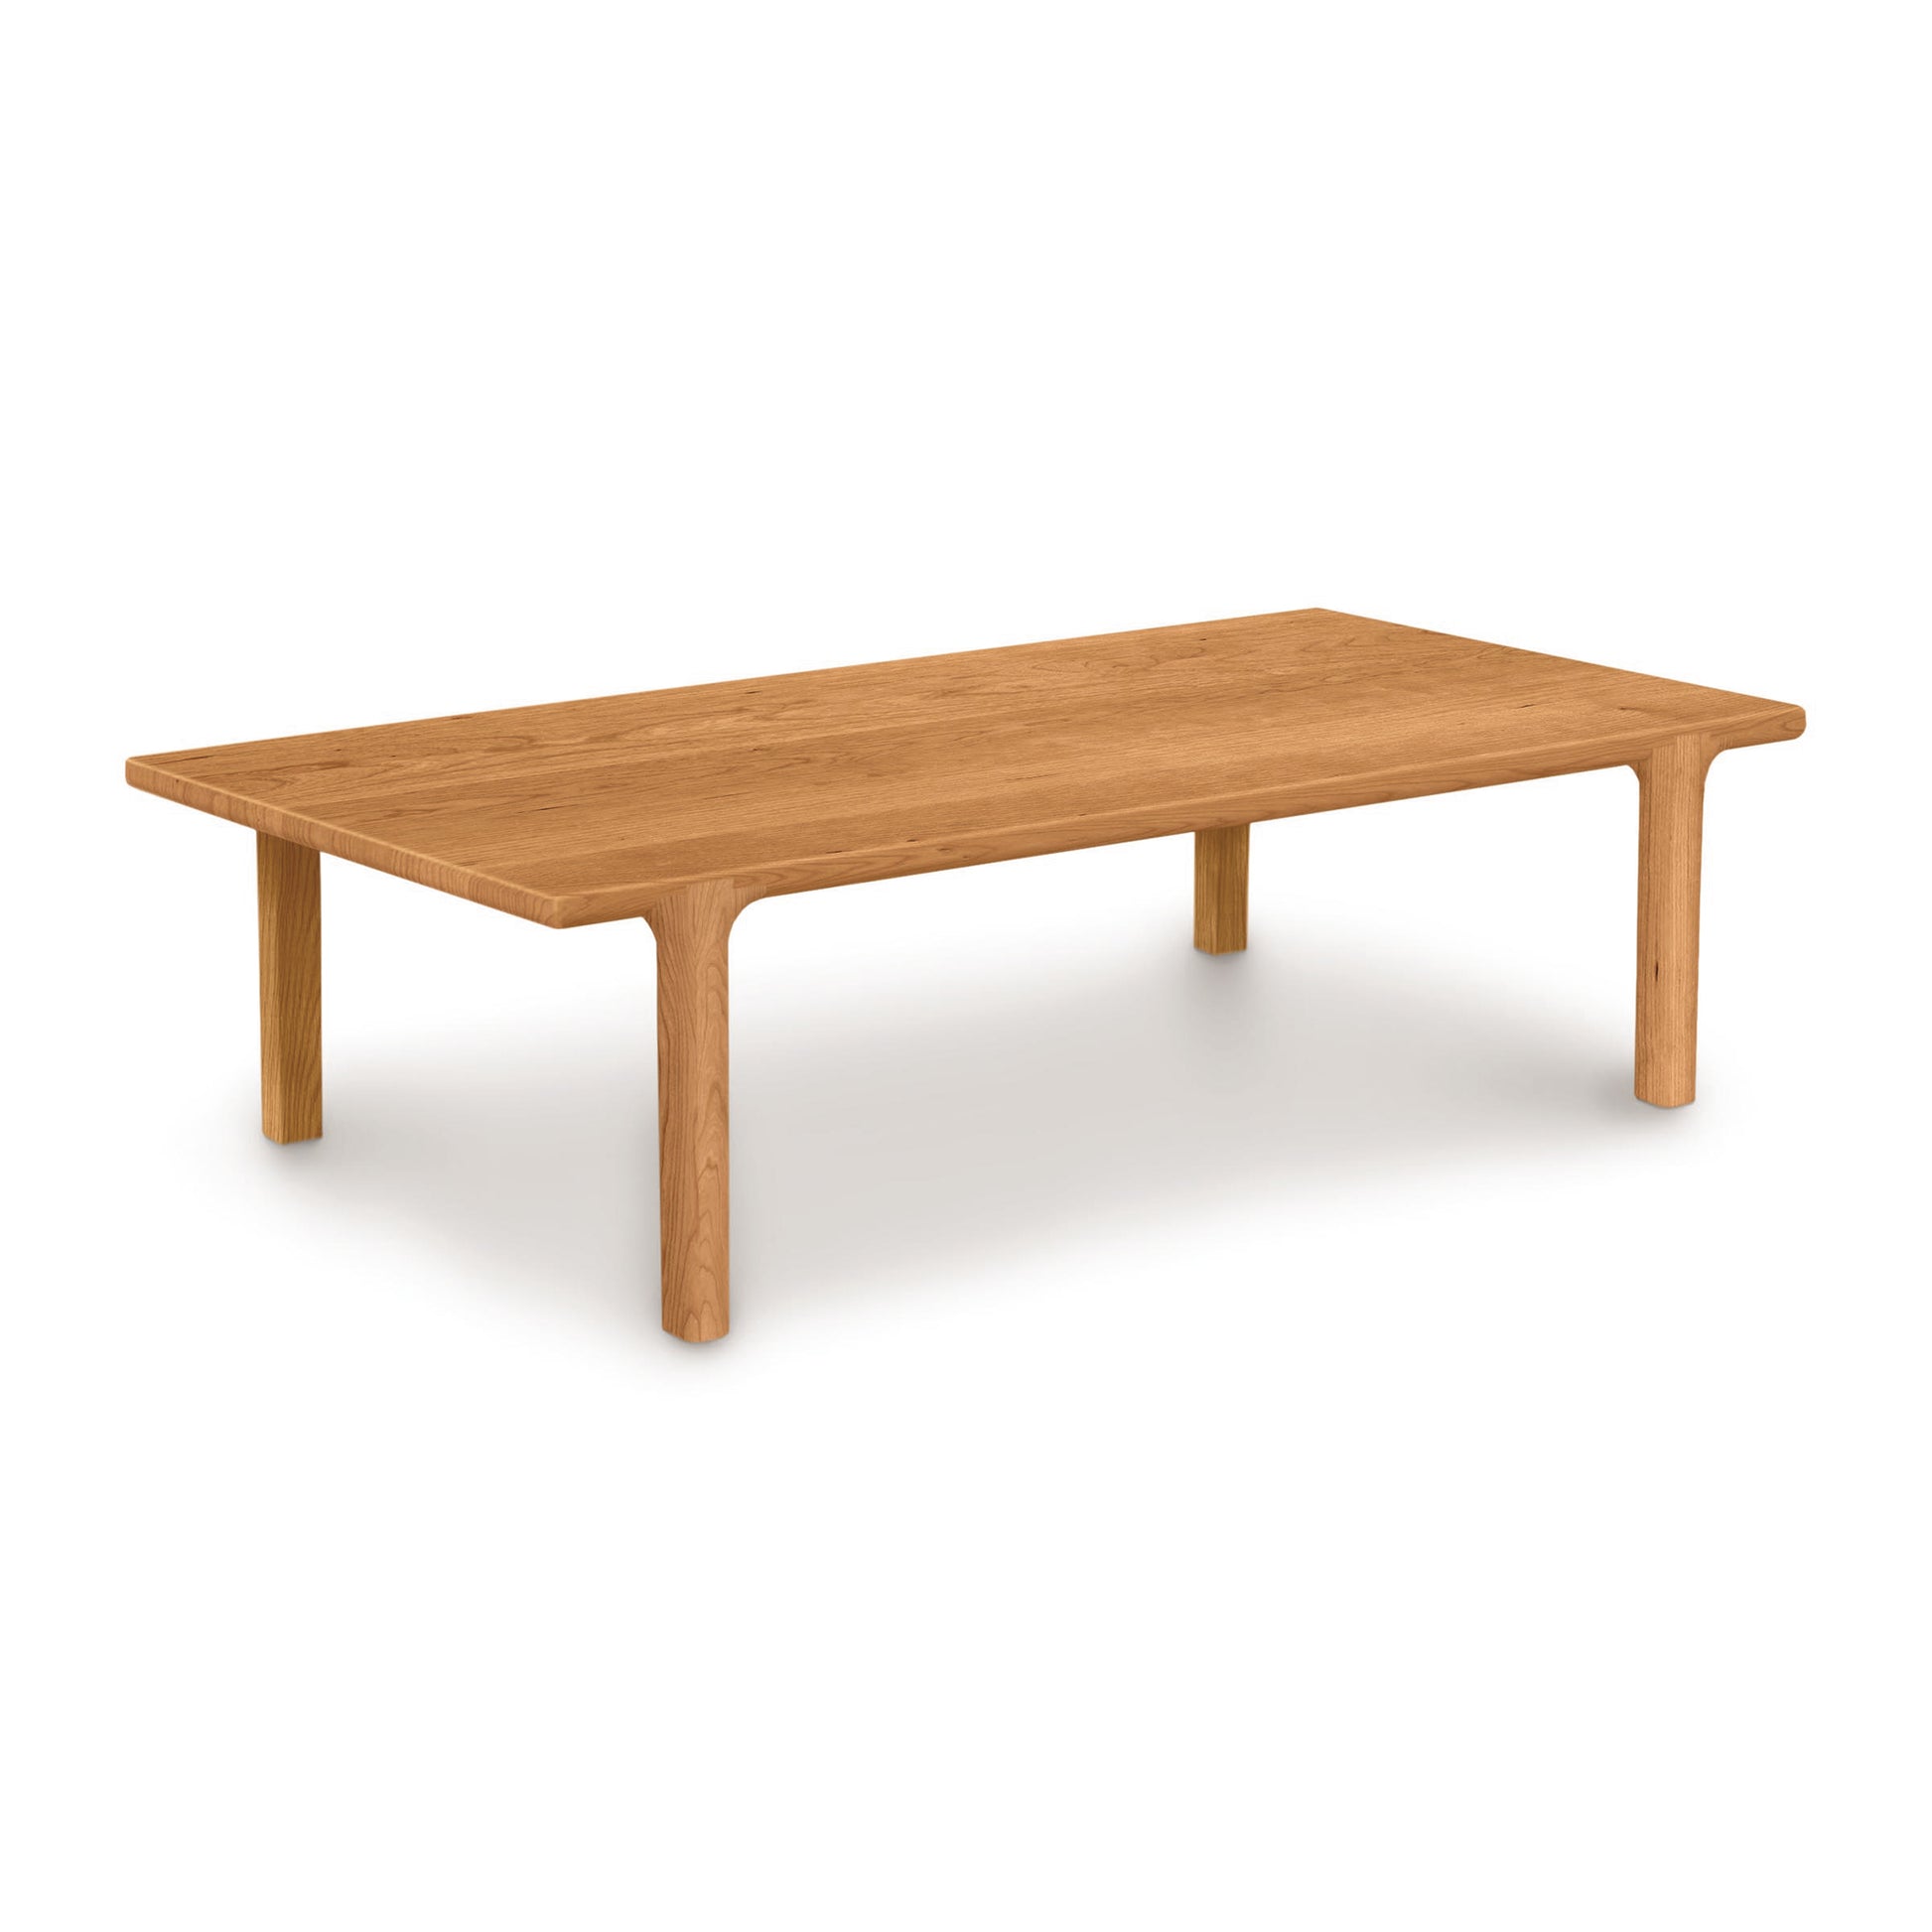 A Sierra Rectangular Coffee Table by Copeland Furniture on a white background, showcasing beautiful wood finishes.